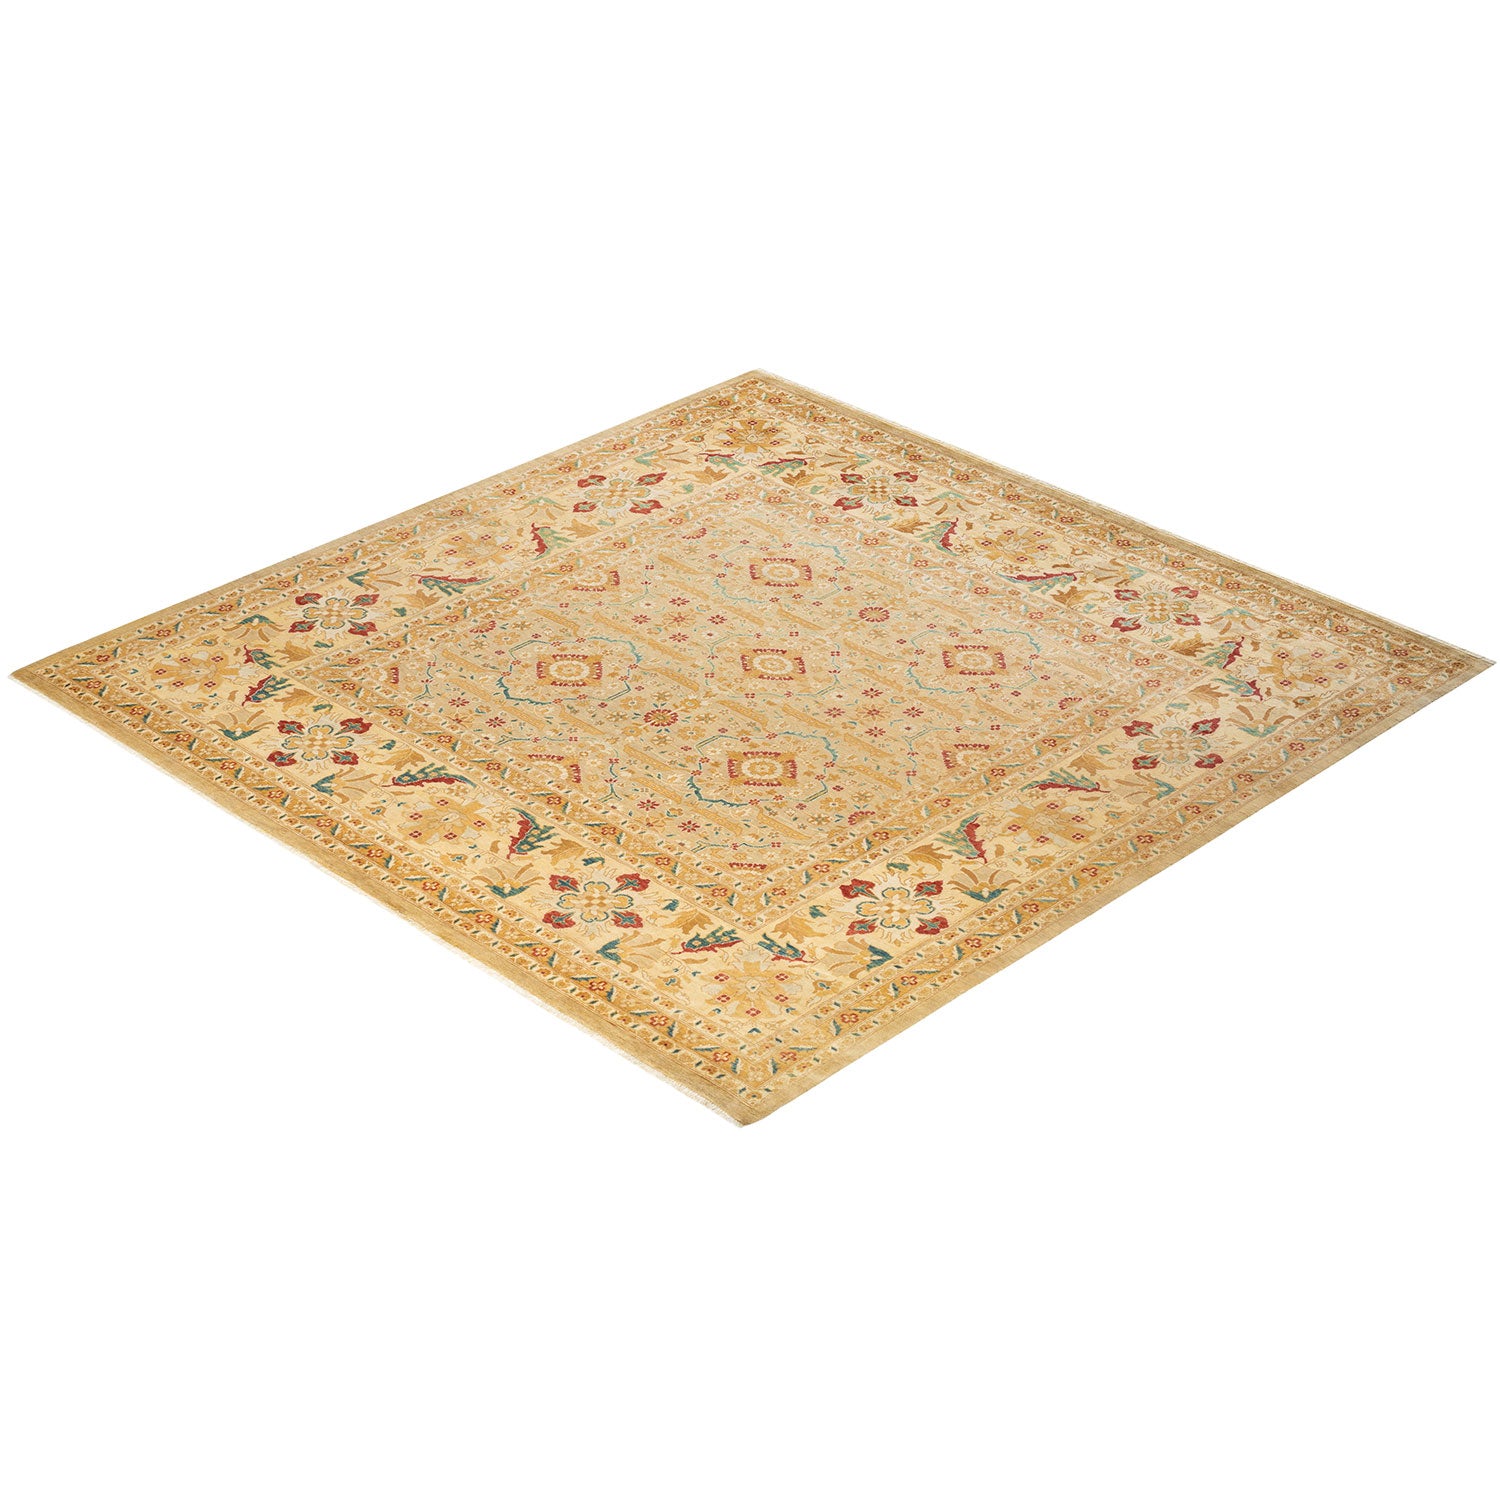 Exquisite hand-woven rug showcases intricate designs and vibrant colors.